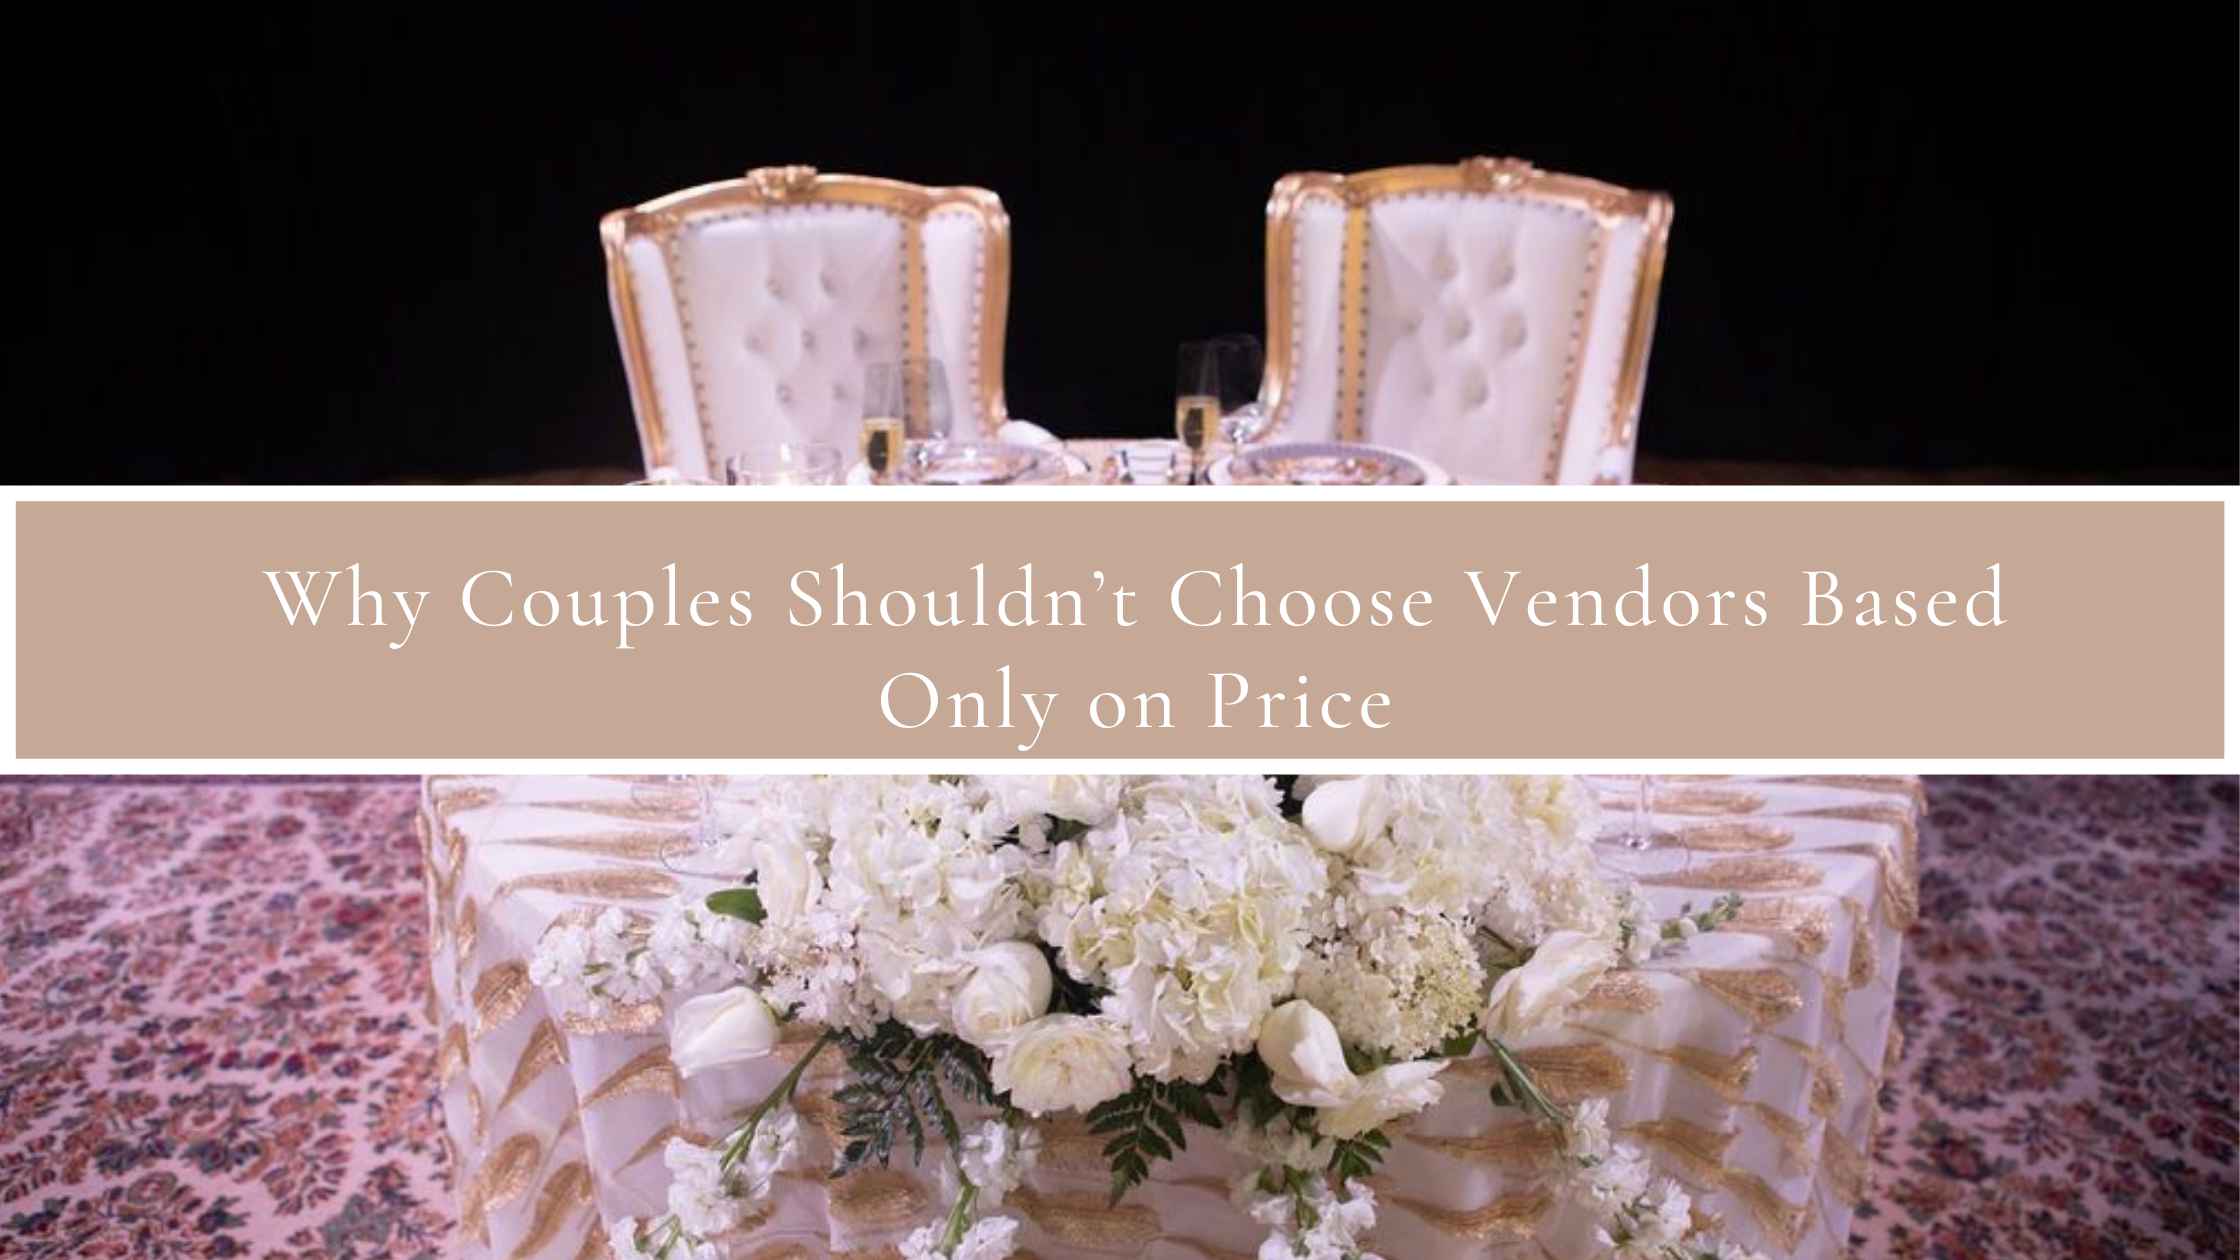 Why Couples Shouldn’t Choose Vendors Based Only on Price